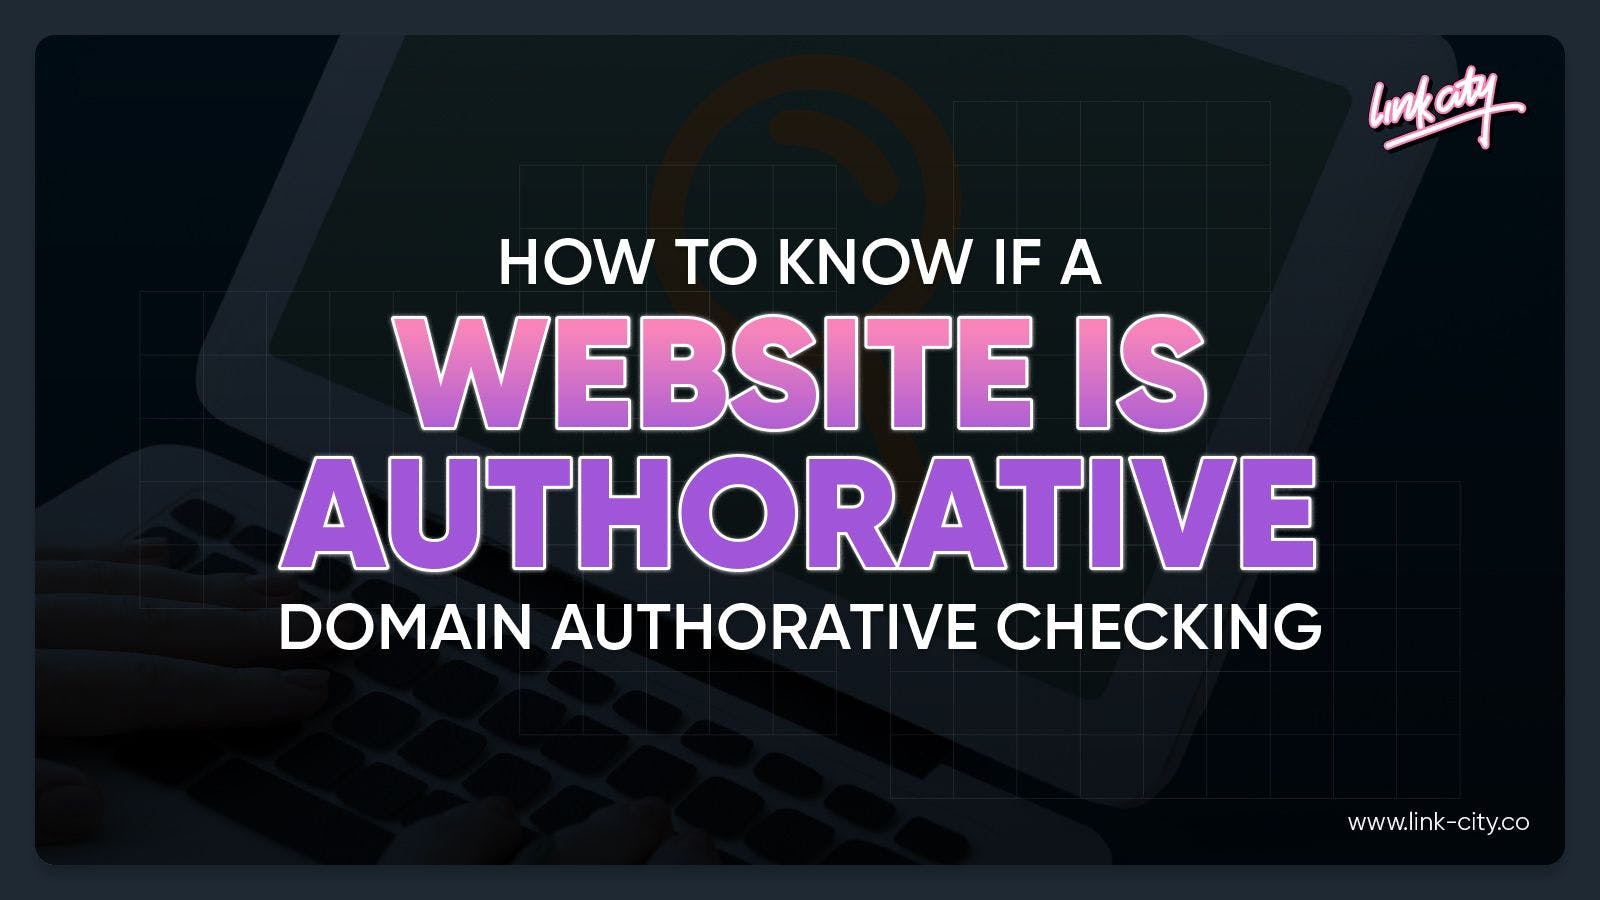 How to know if a website is authoritative: Domain Authority Checking